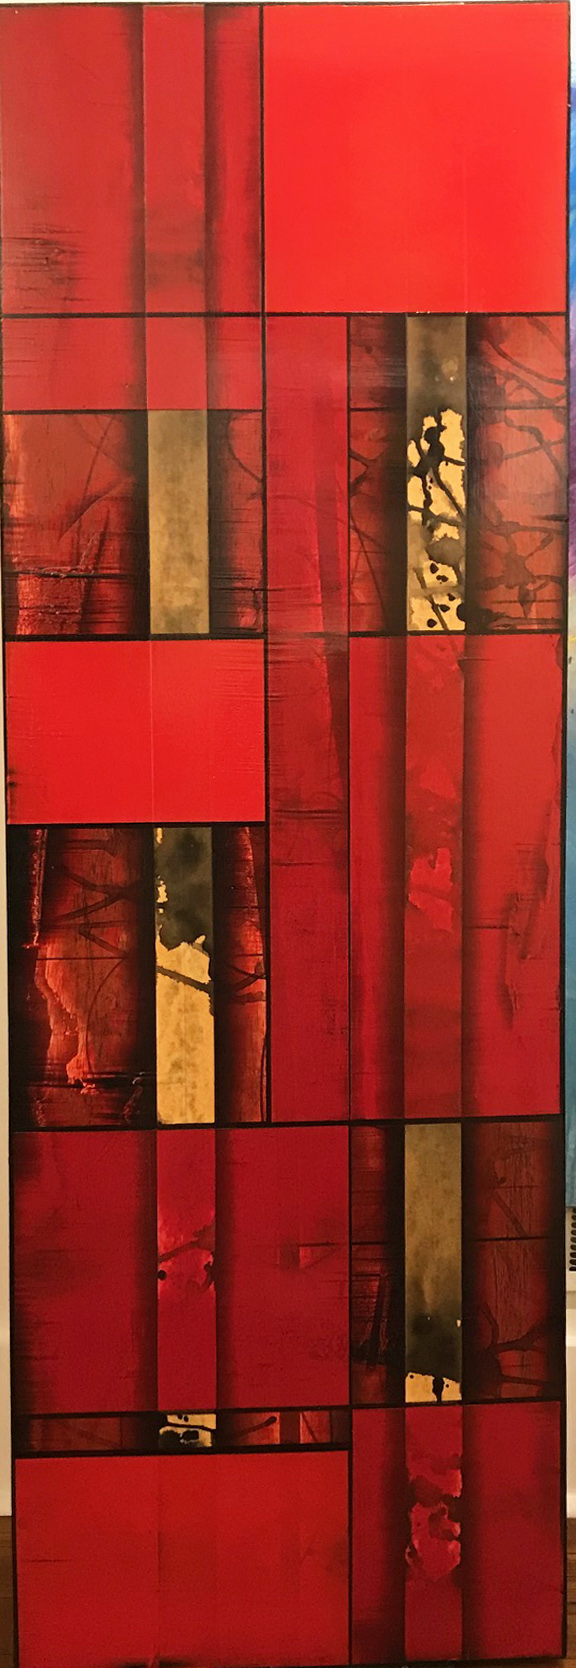 REDSIDER 20, acrylic on panel, 60 x 20 inches